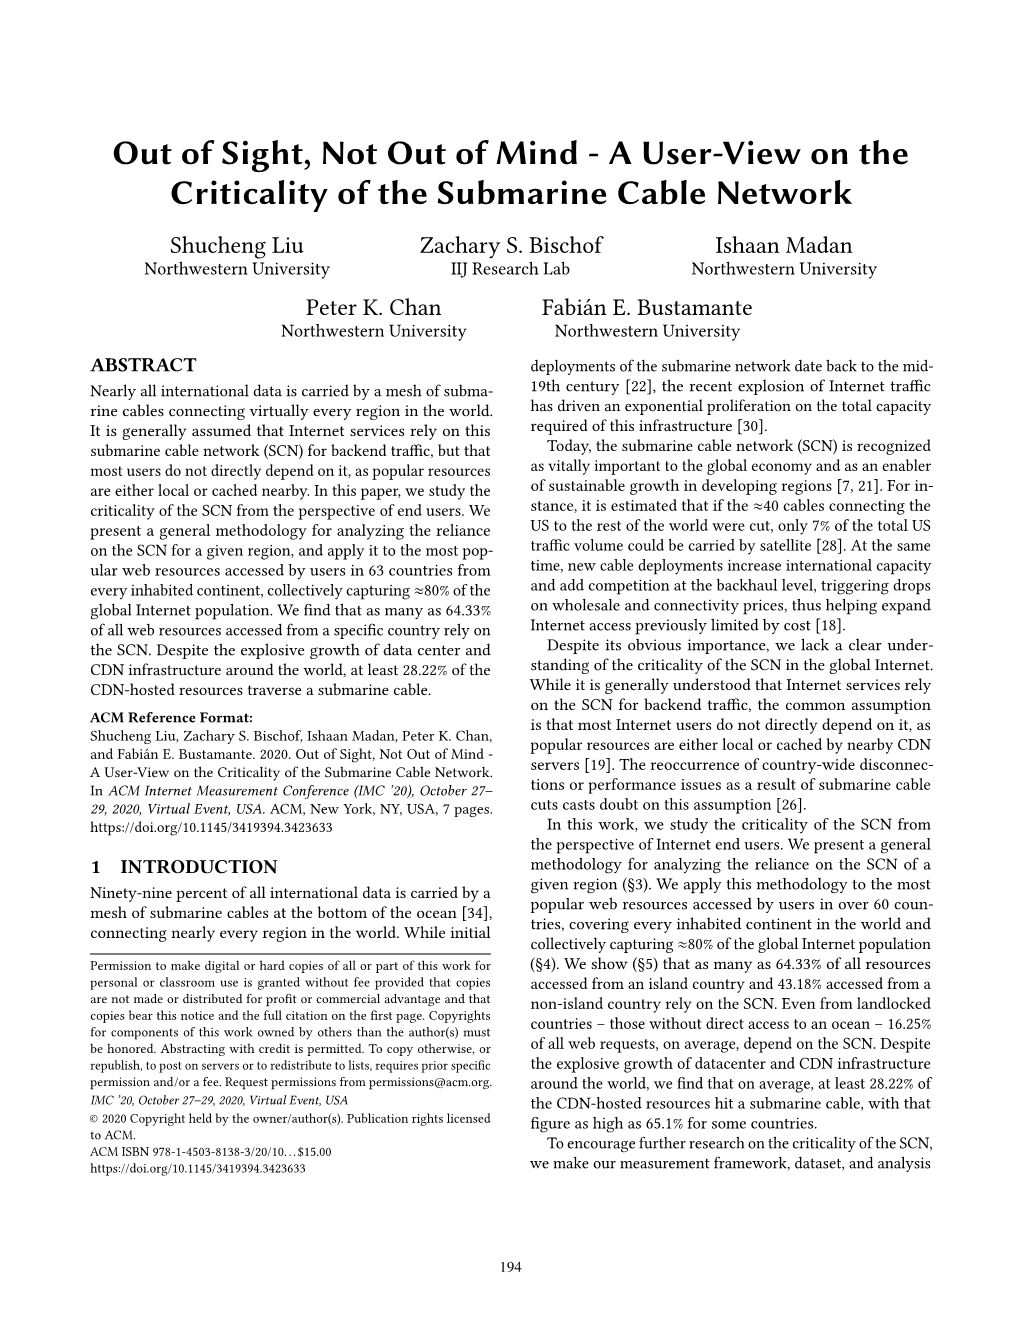 Out of Sight, Not out of Mind - a User-View on the Criticality of the Submarine Cable Network Shucheng Liu Zachary S